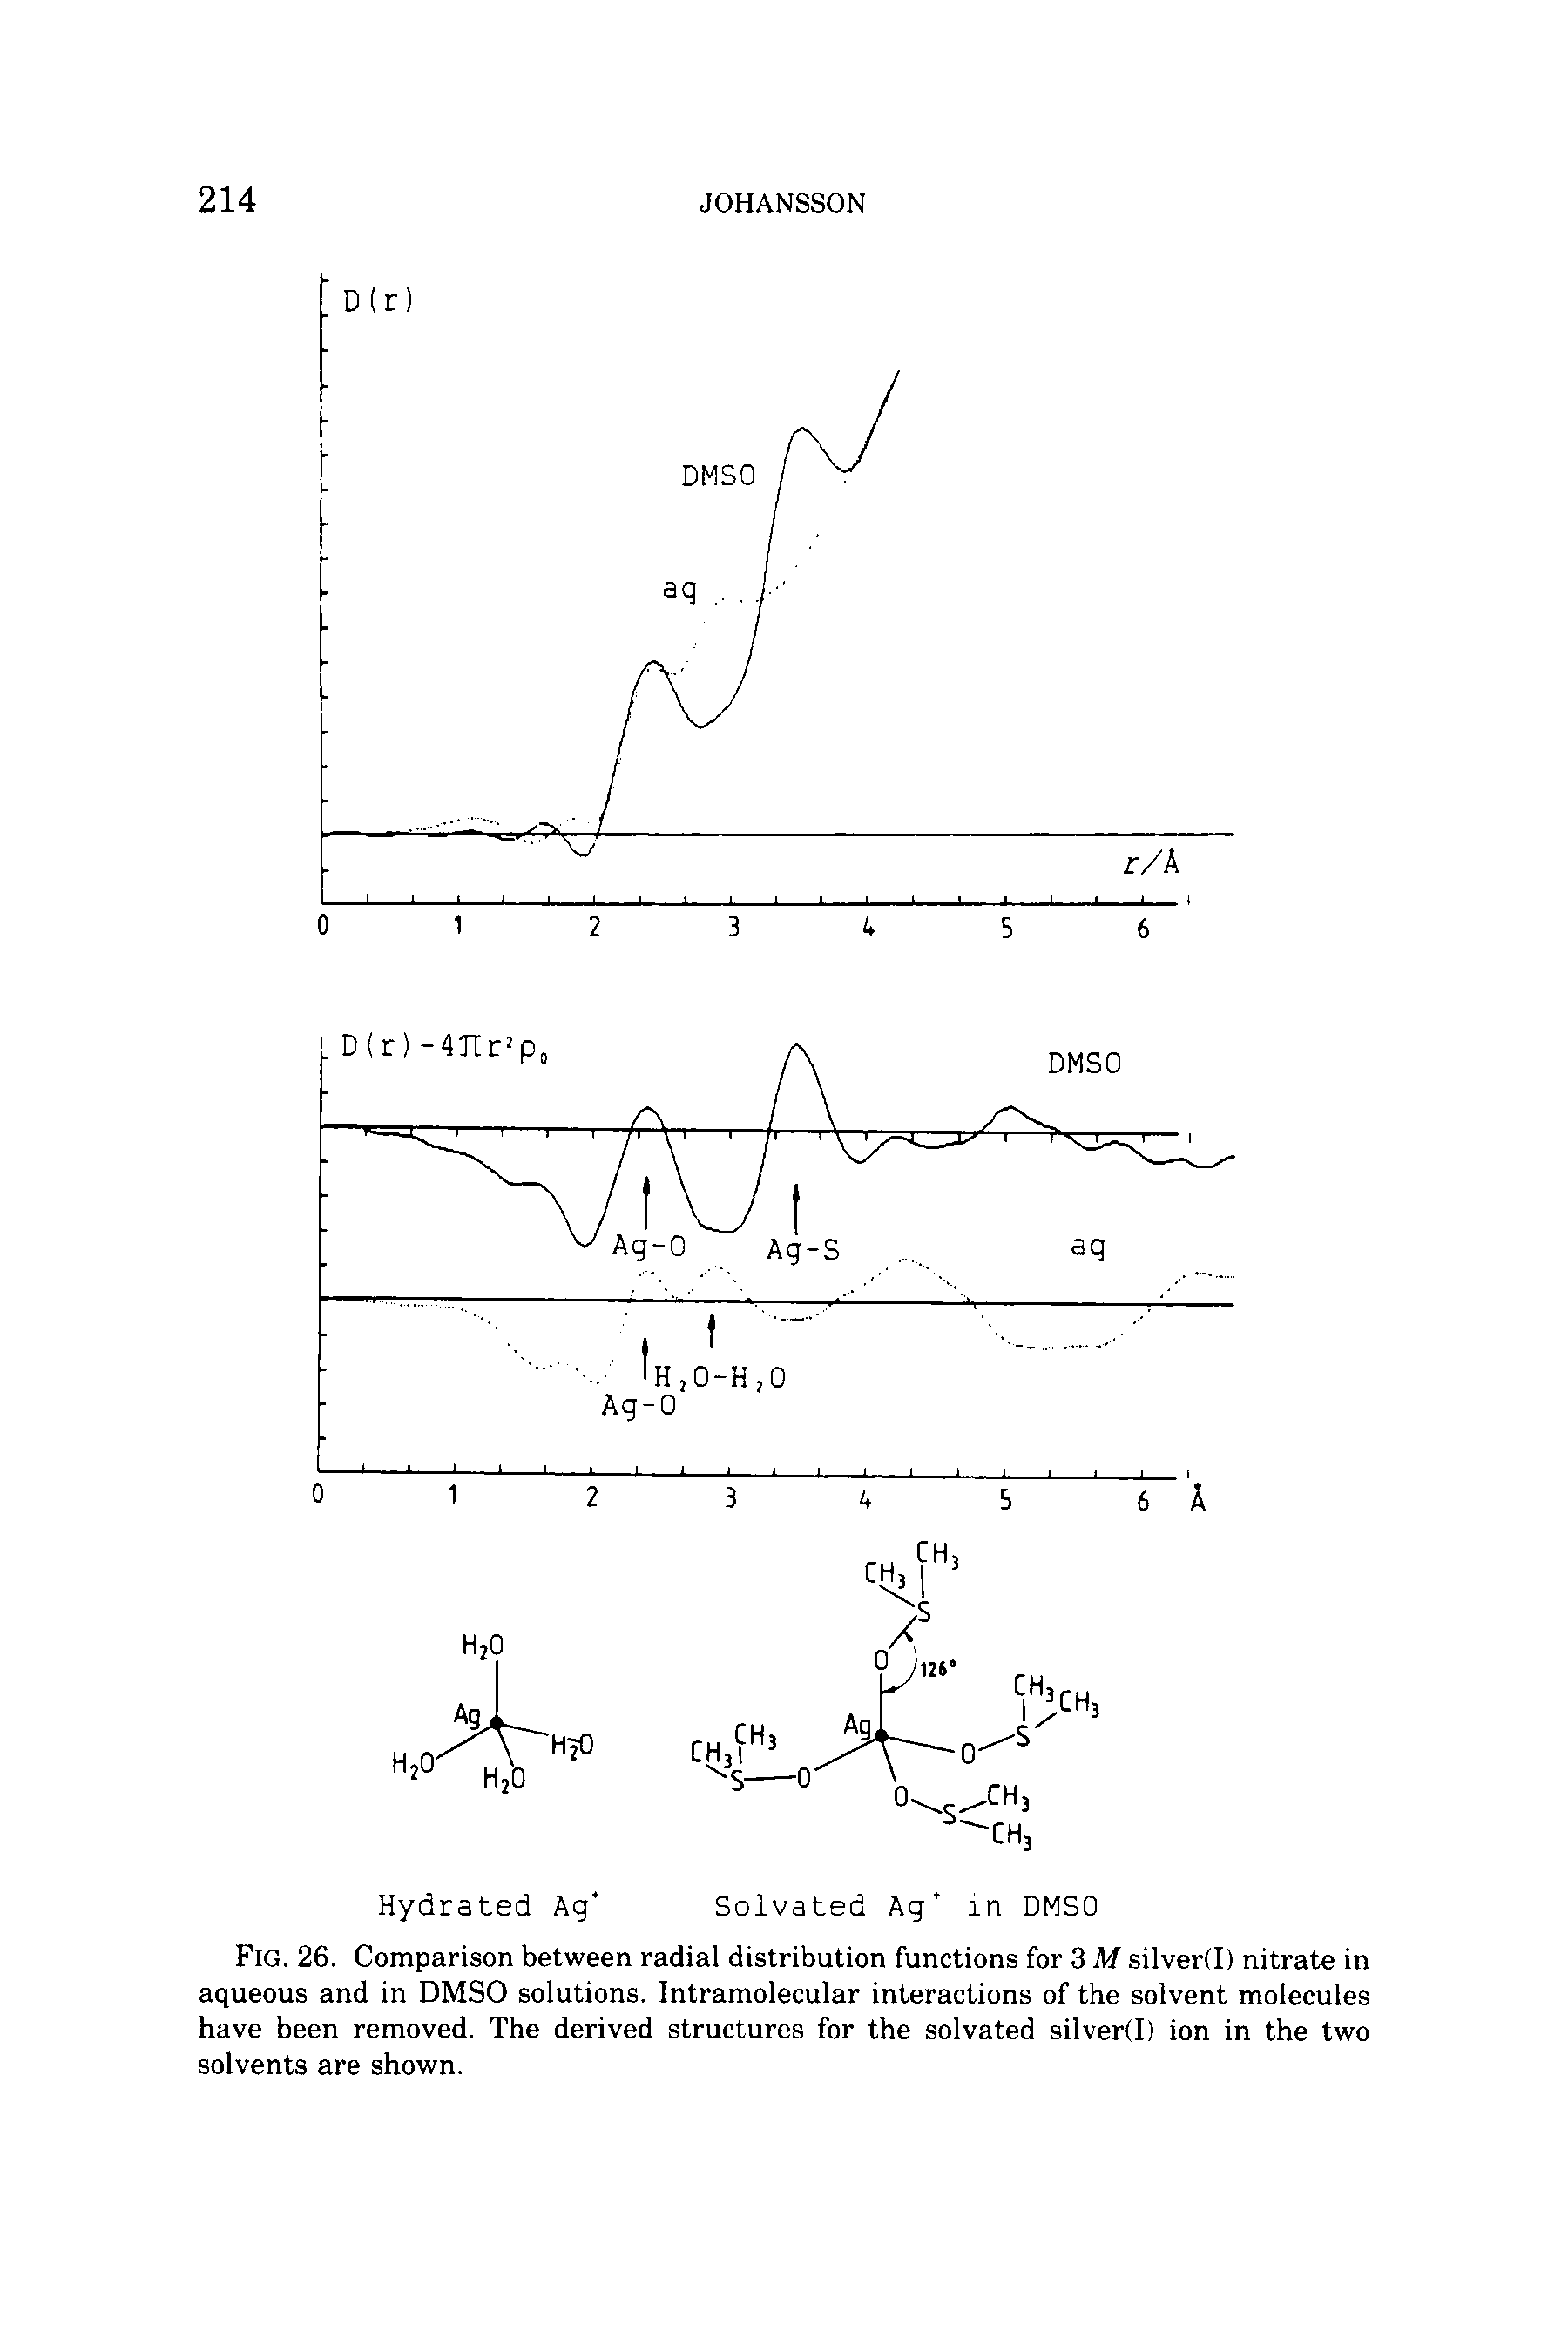 Fig. 26. Comparison between radial distribution functions for 3 M silver(I) nitrate in aqueous and in DMSO solutions. Intramolecular interactions of the solvent molecules have been removed. The derived structures for the solvated silver(I) ion in the two solvents are shown.